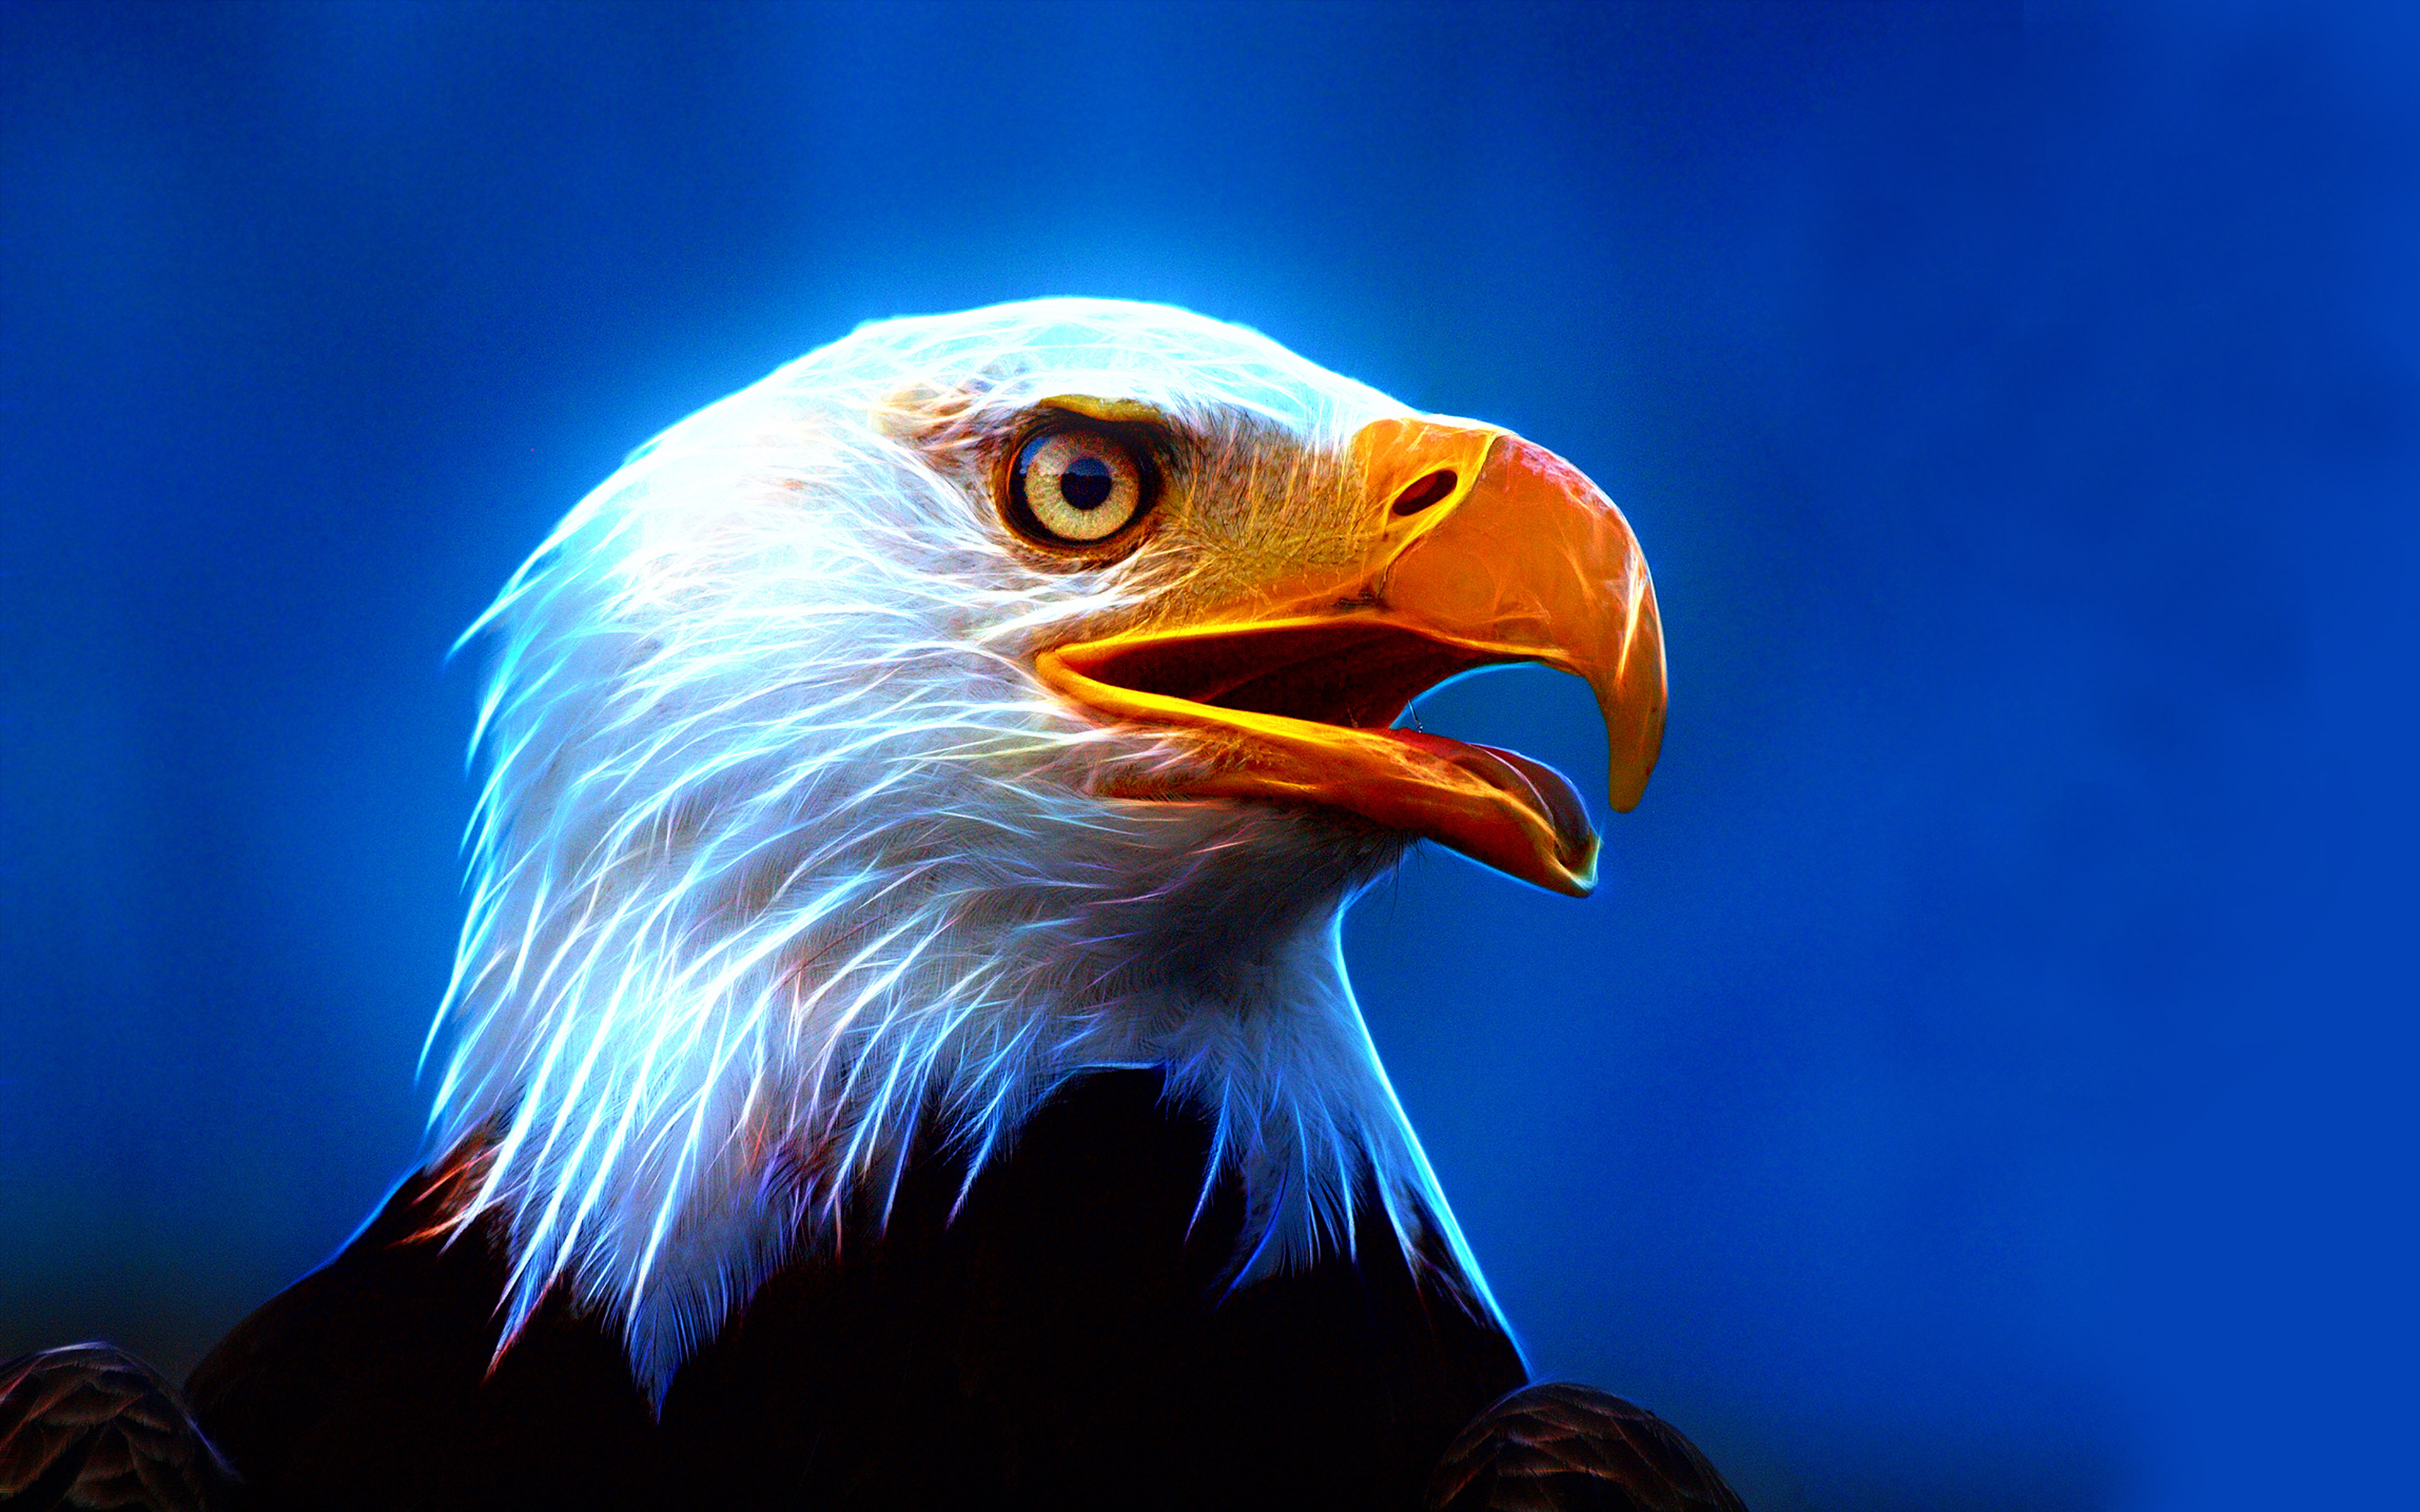 Eagle Ultra Hd Wallpaper For Mobile Phone And Pc : Wallpapers13.com